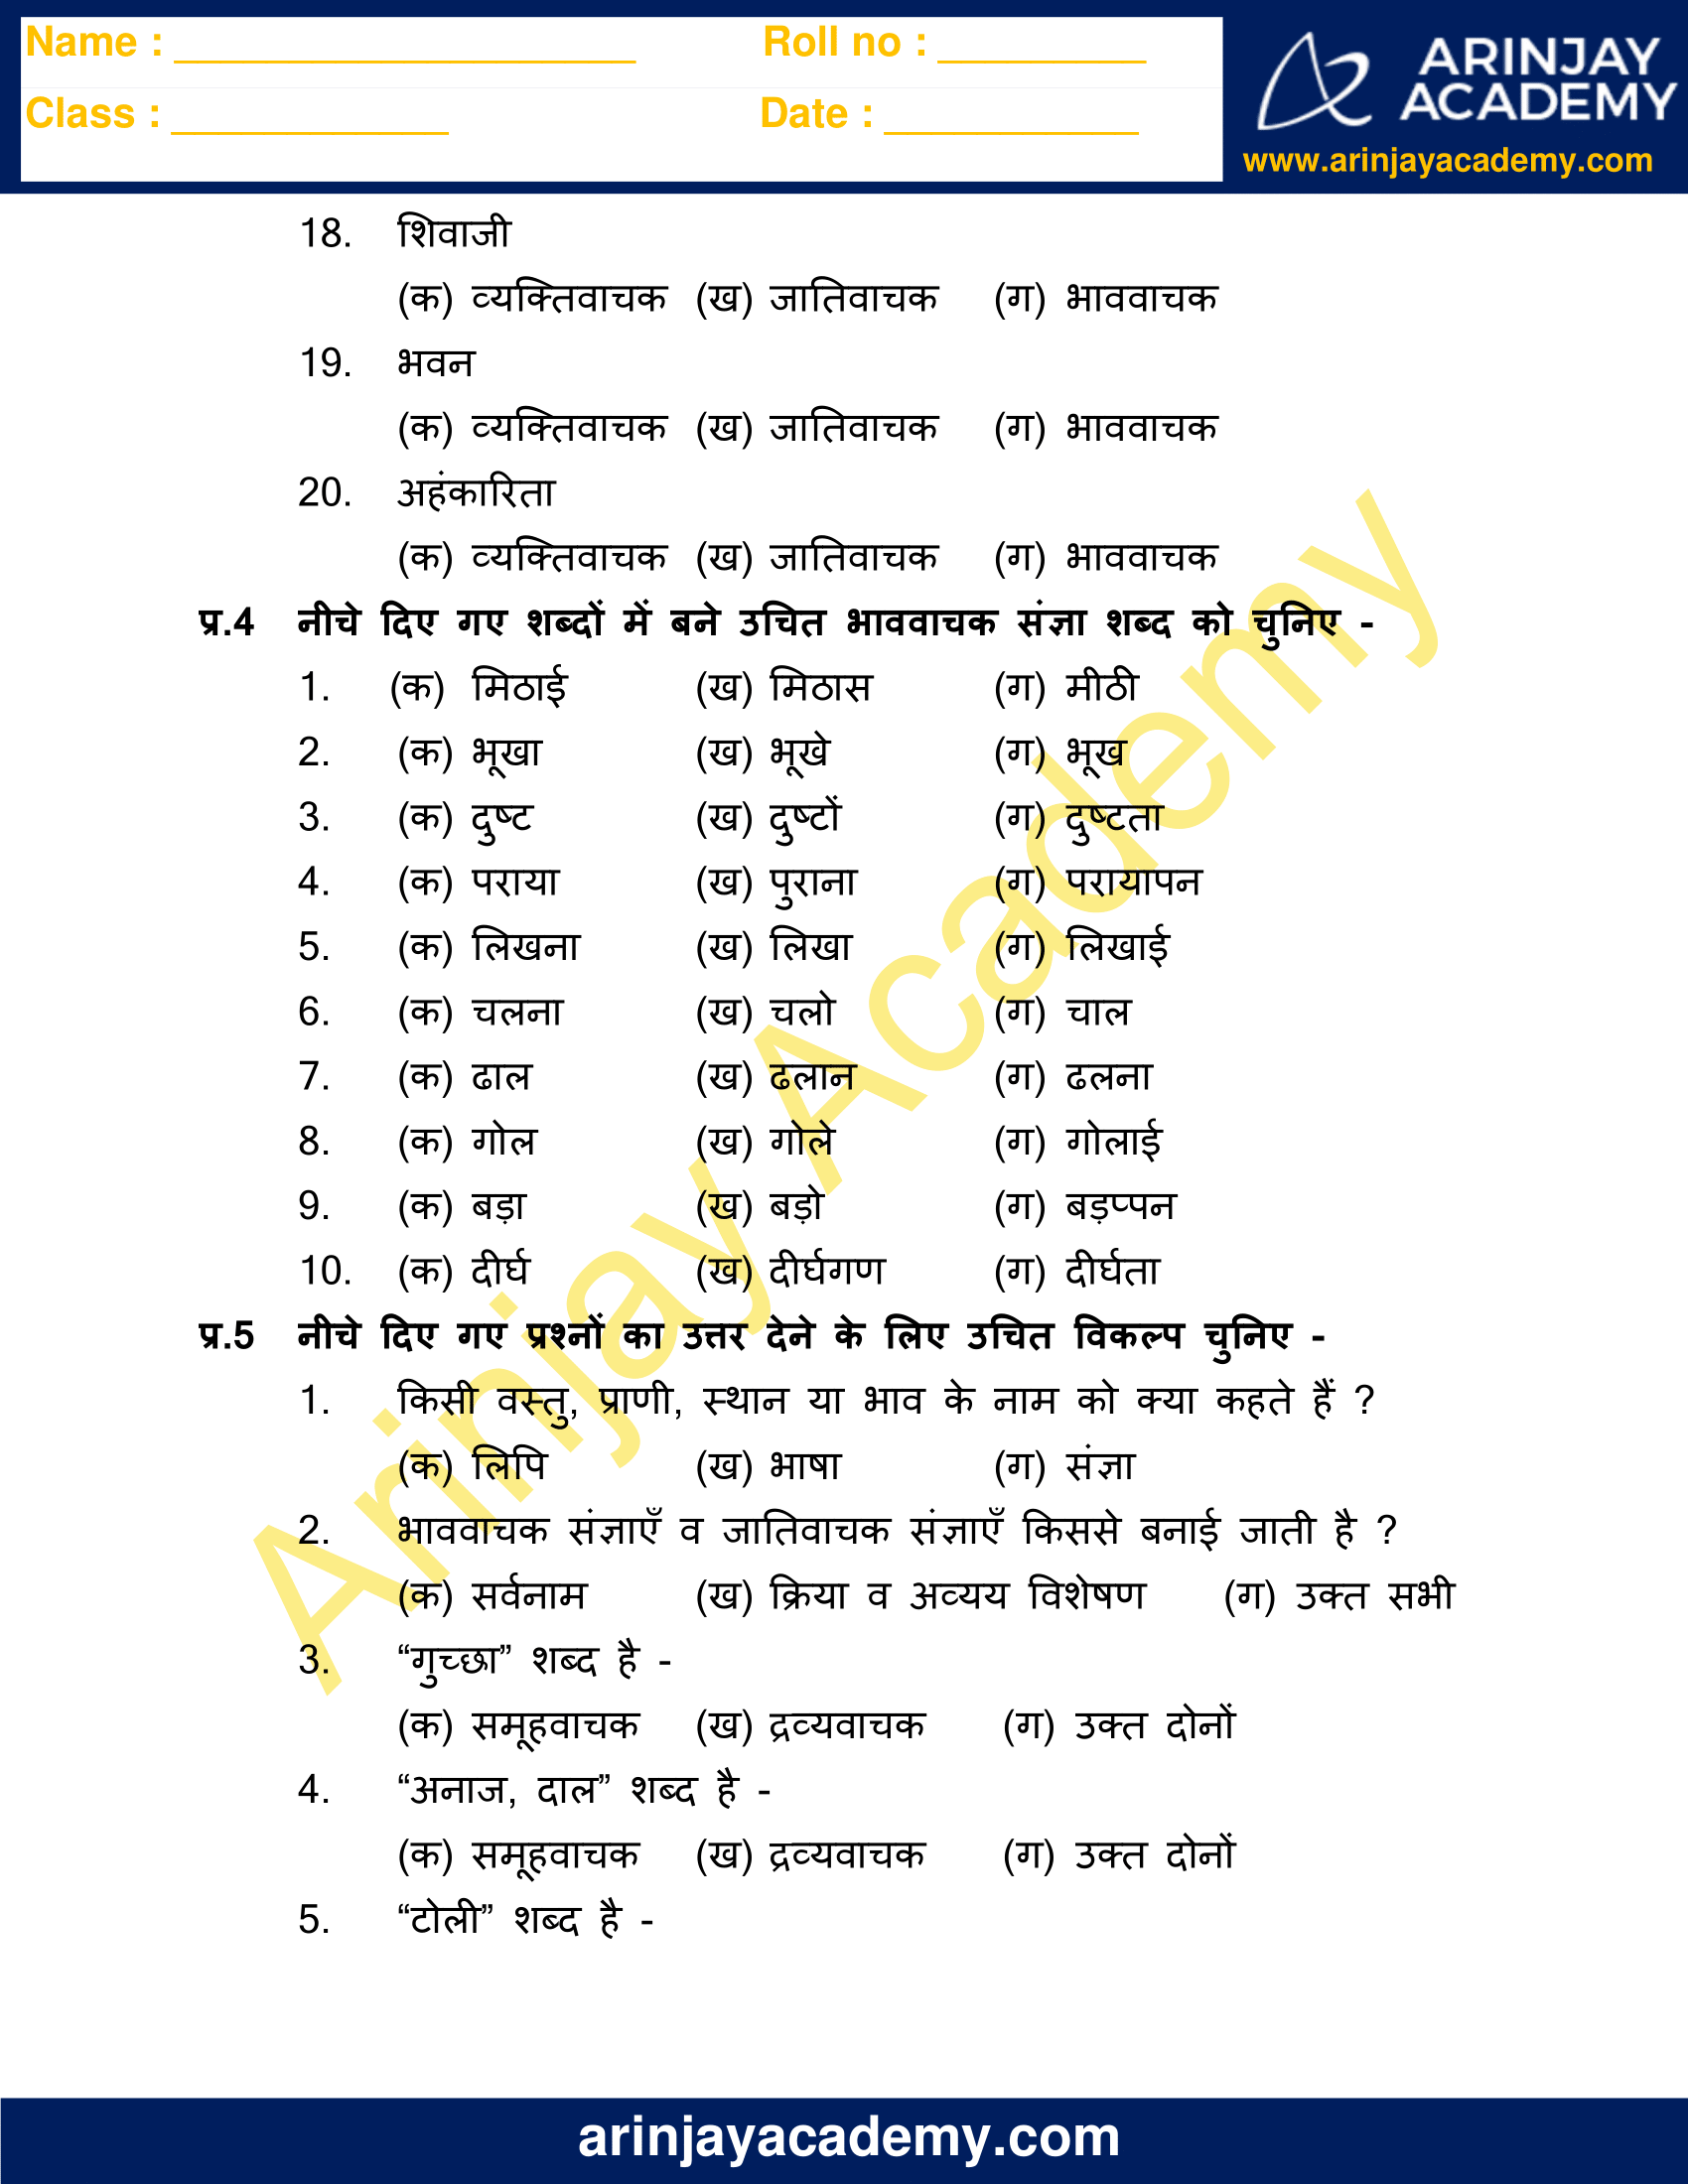 sangya worksheet for class 5 free and printable arinjay academy